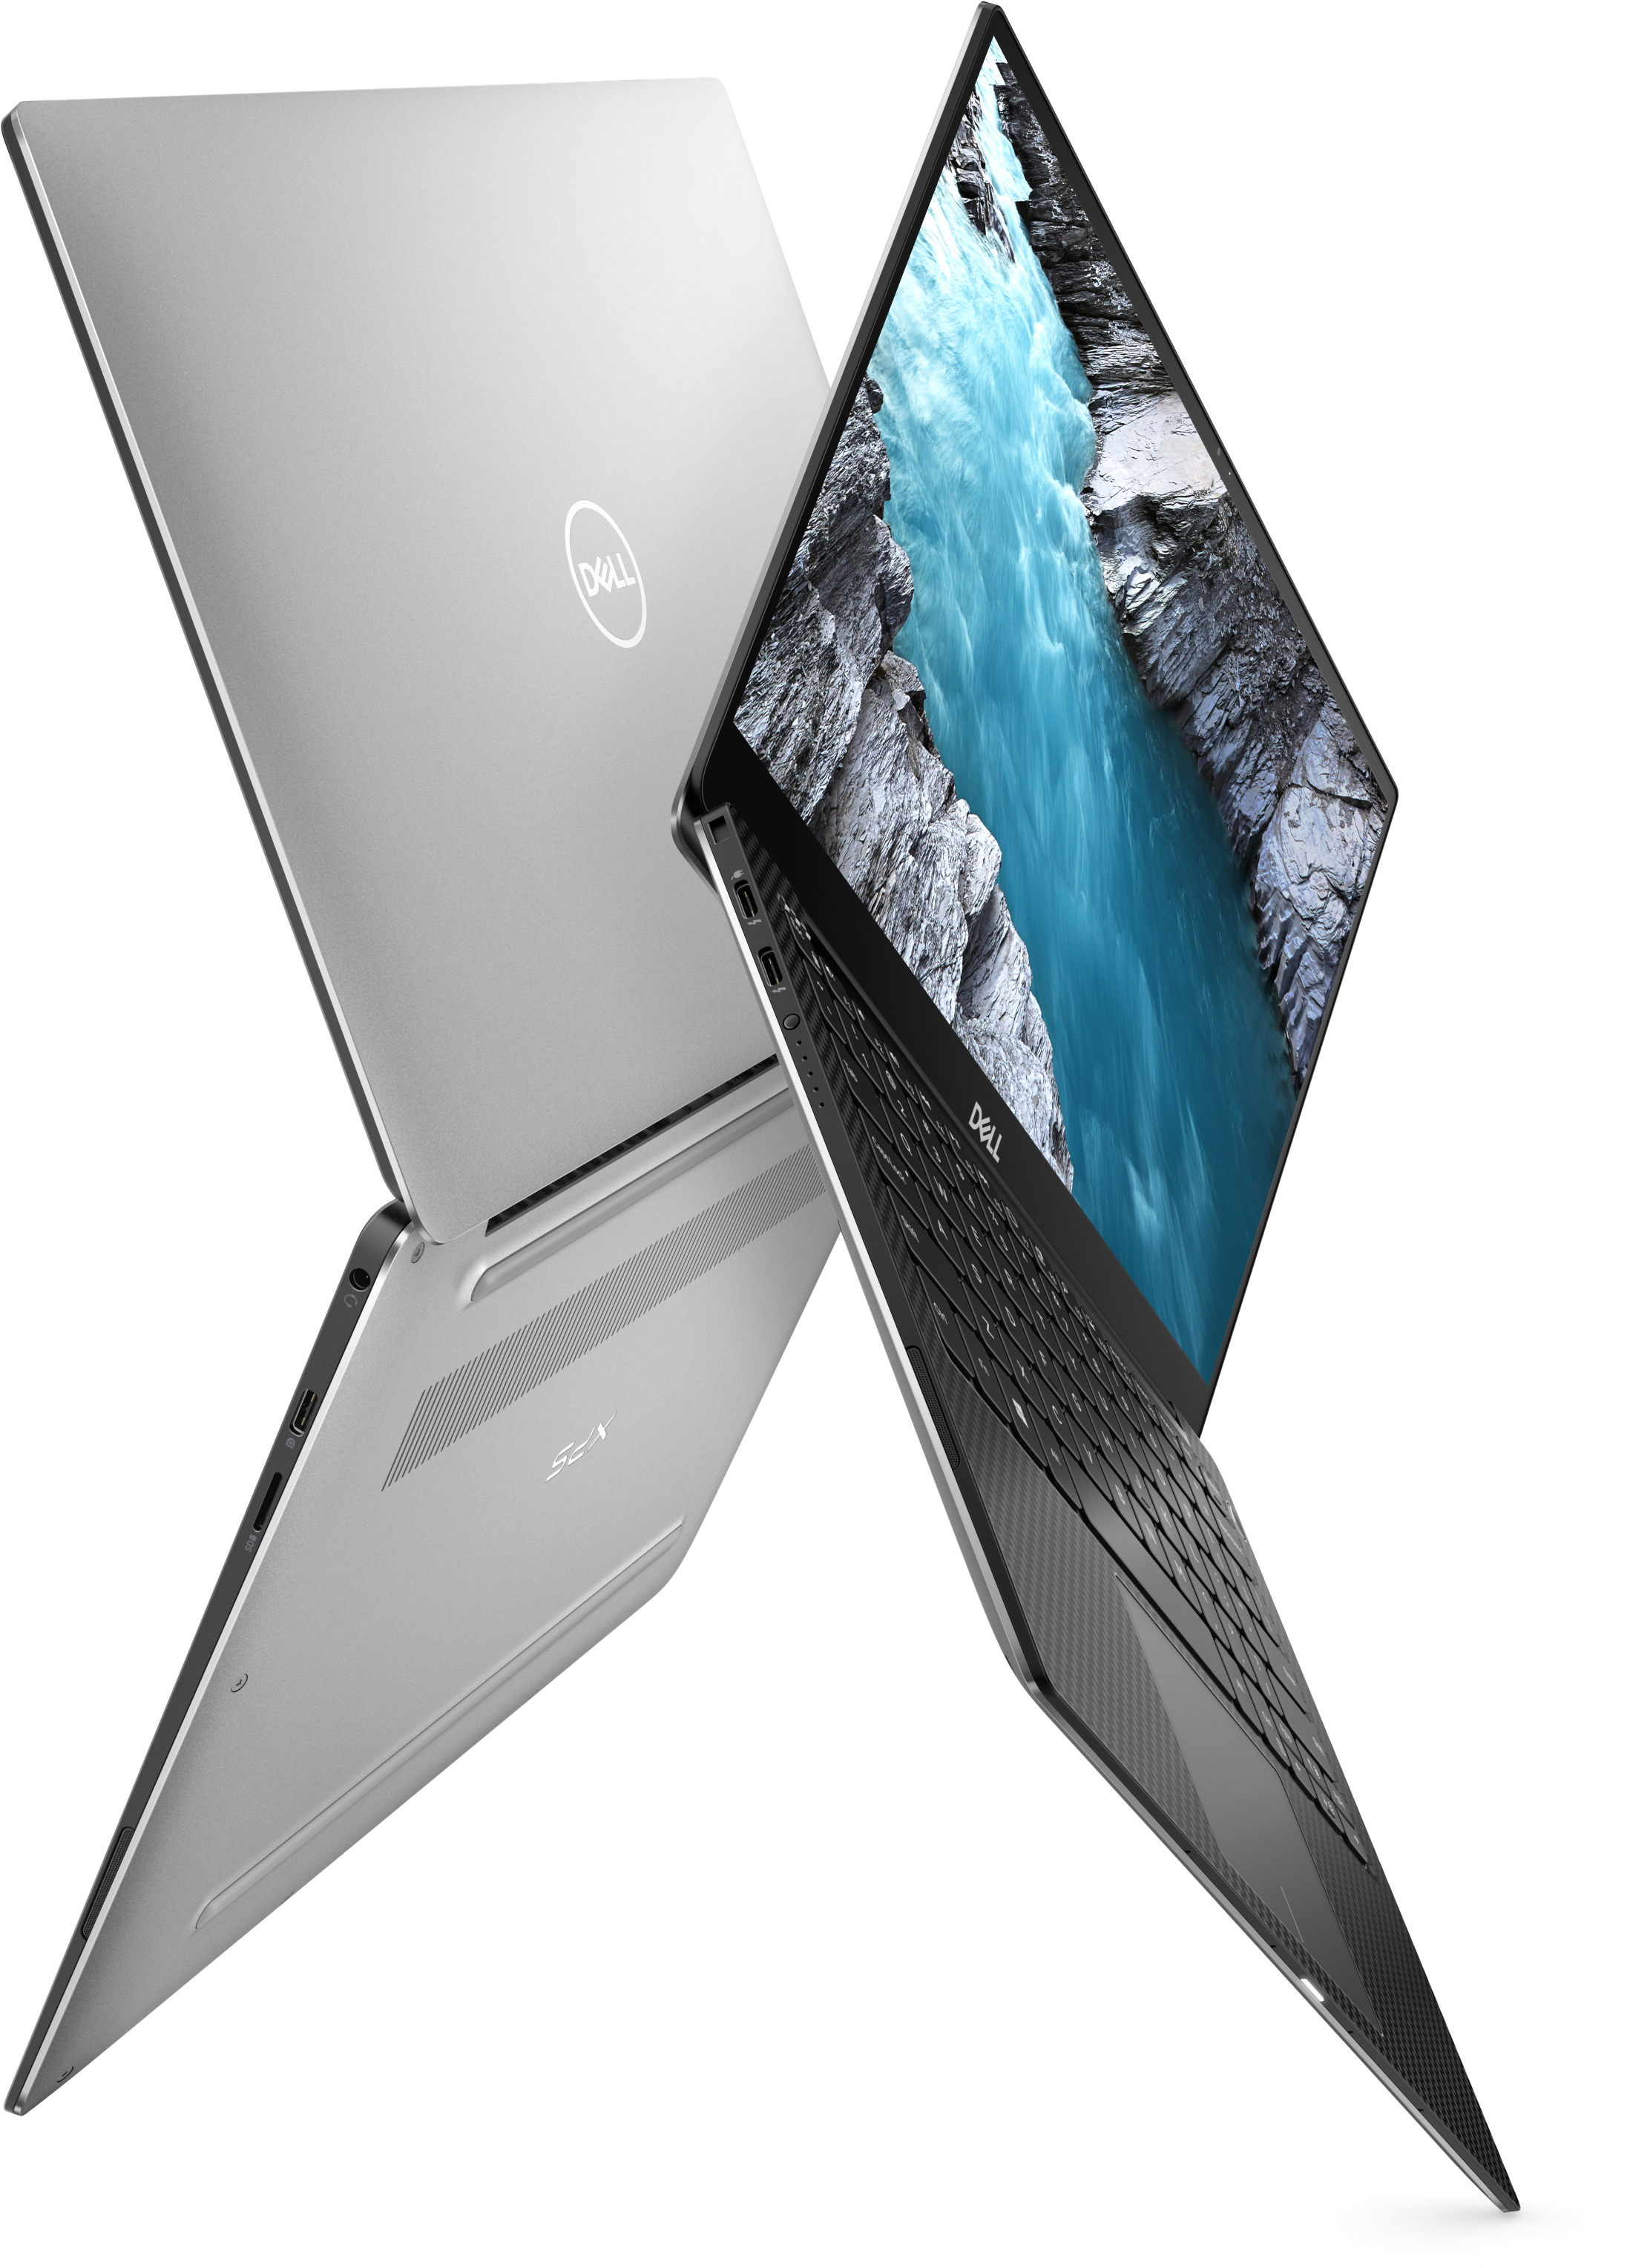 Dell XPS 7390 Laptop | Dell USA